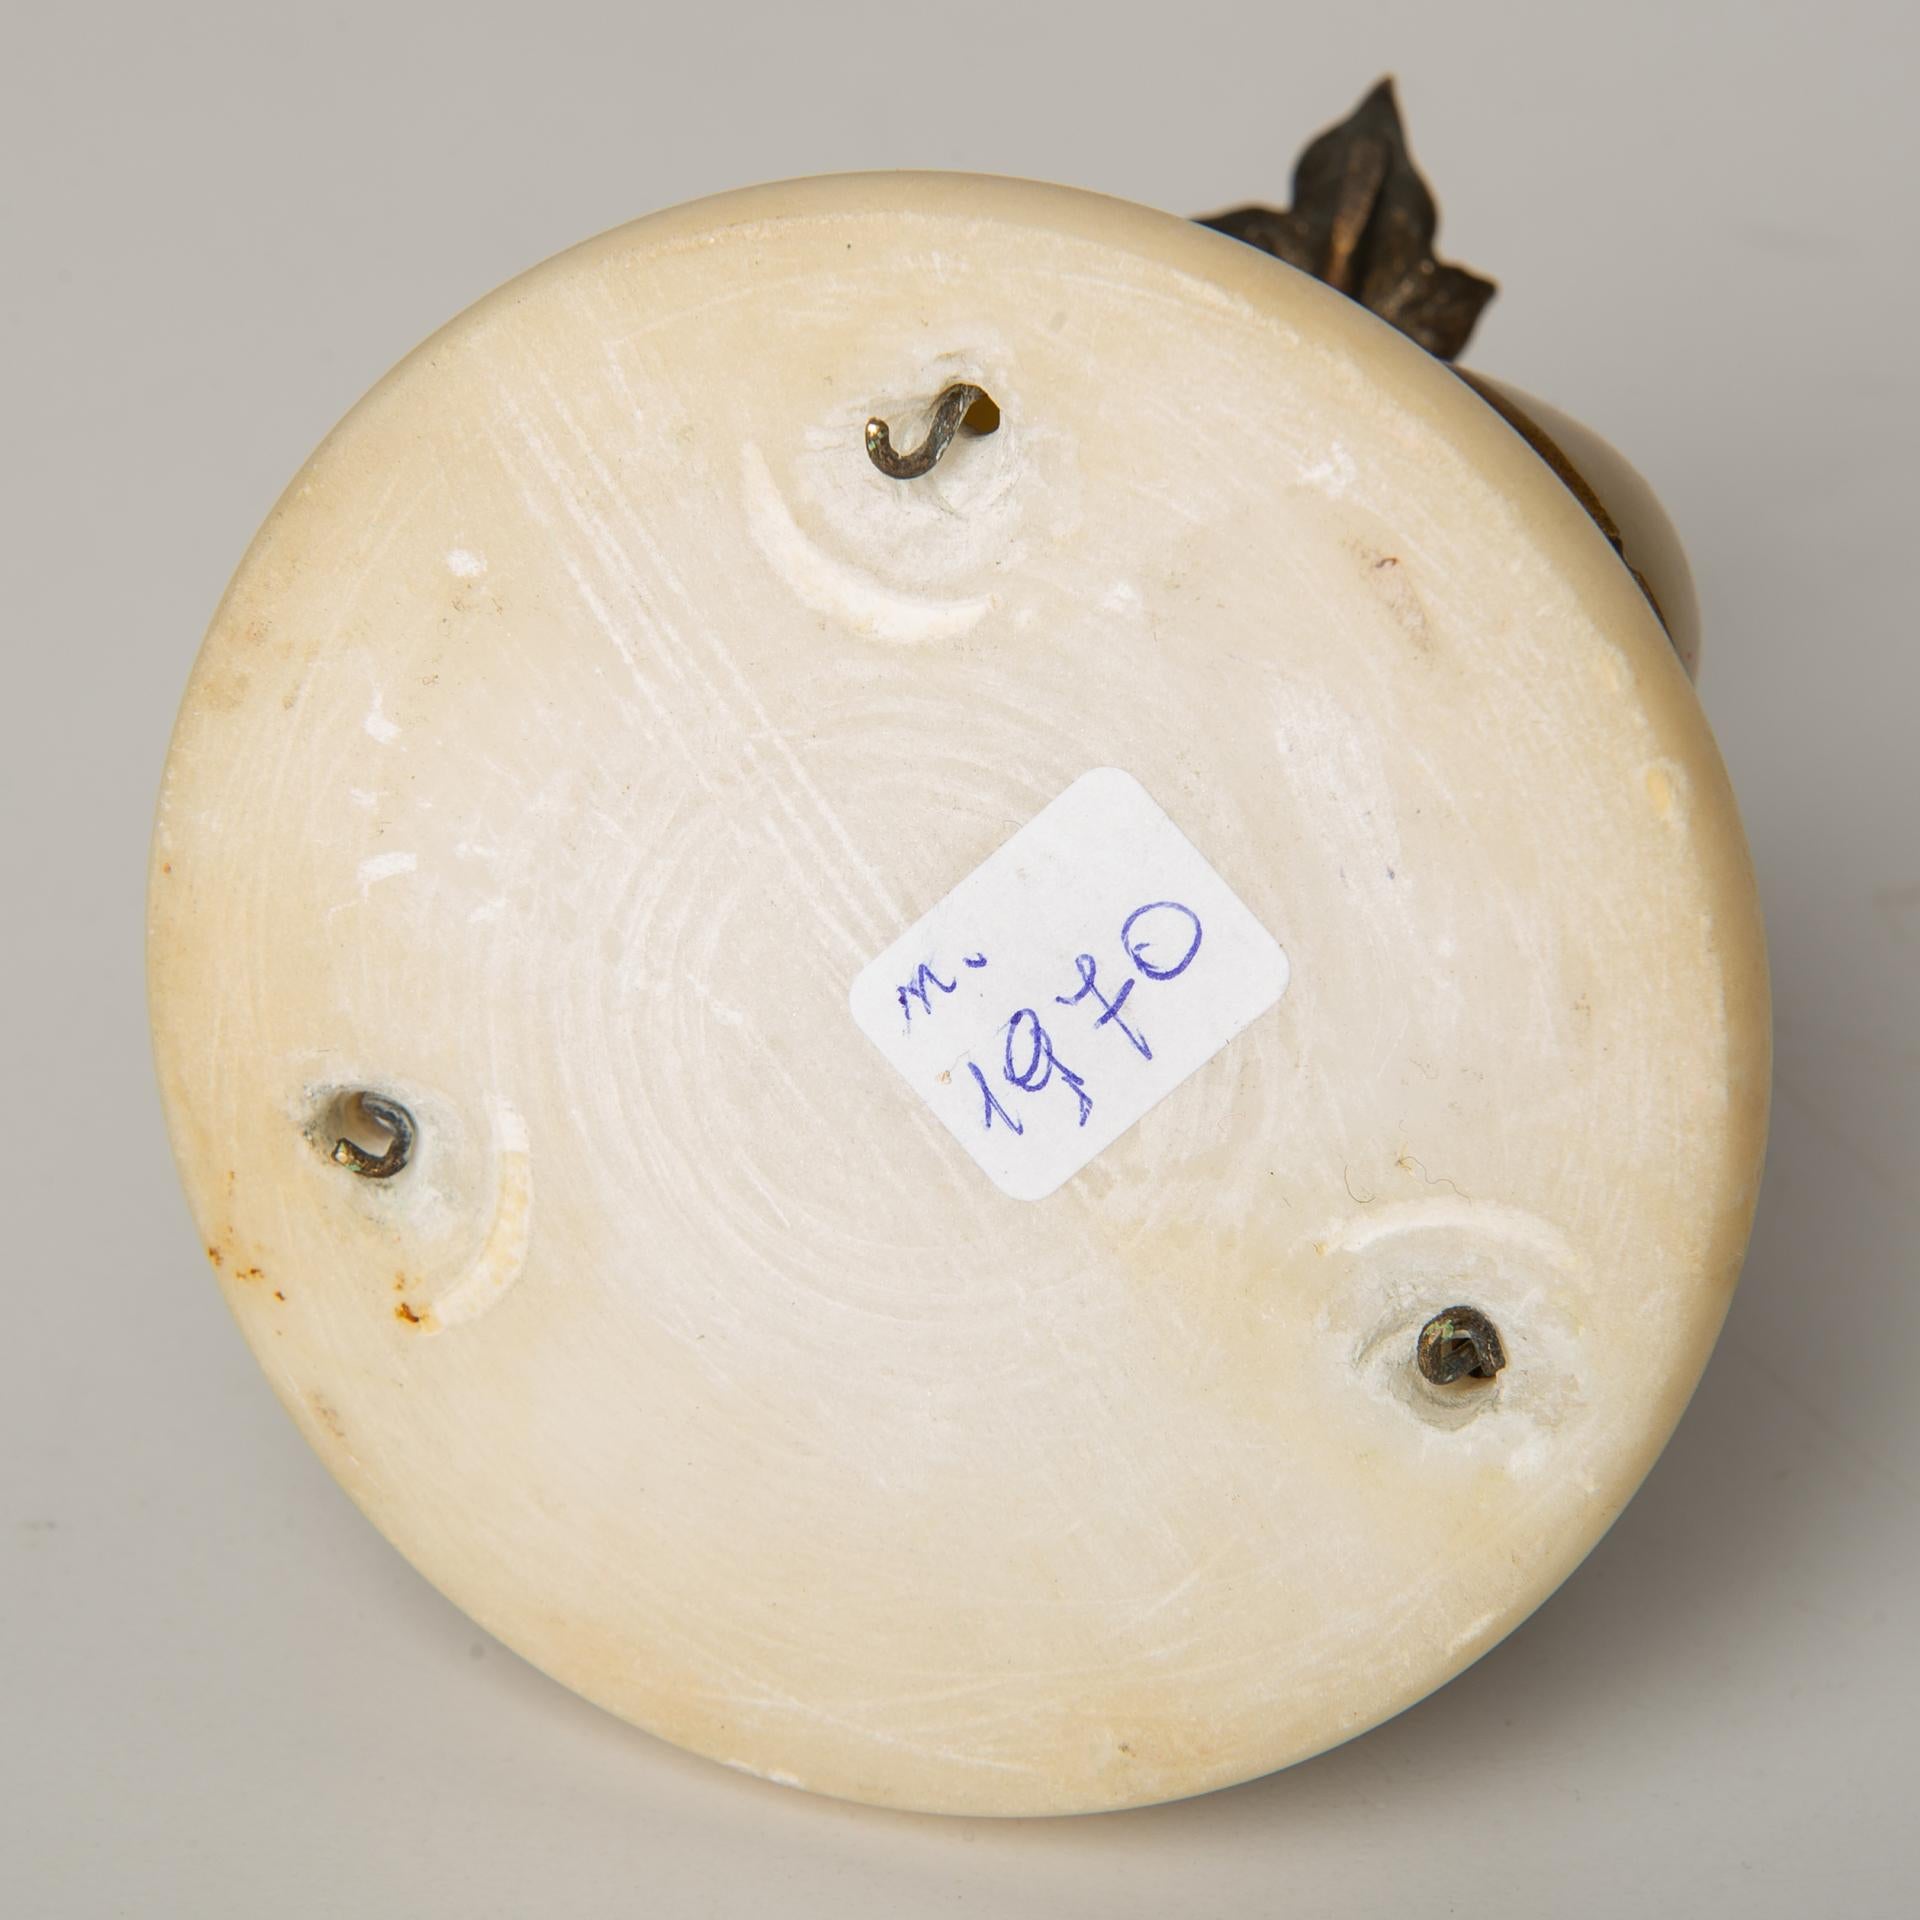 That's an antique dinner bell with abalone , mother -of-pearl bell on a white marble base. I found this object in France during a vacation, and the writing in French confirm it: 